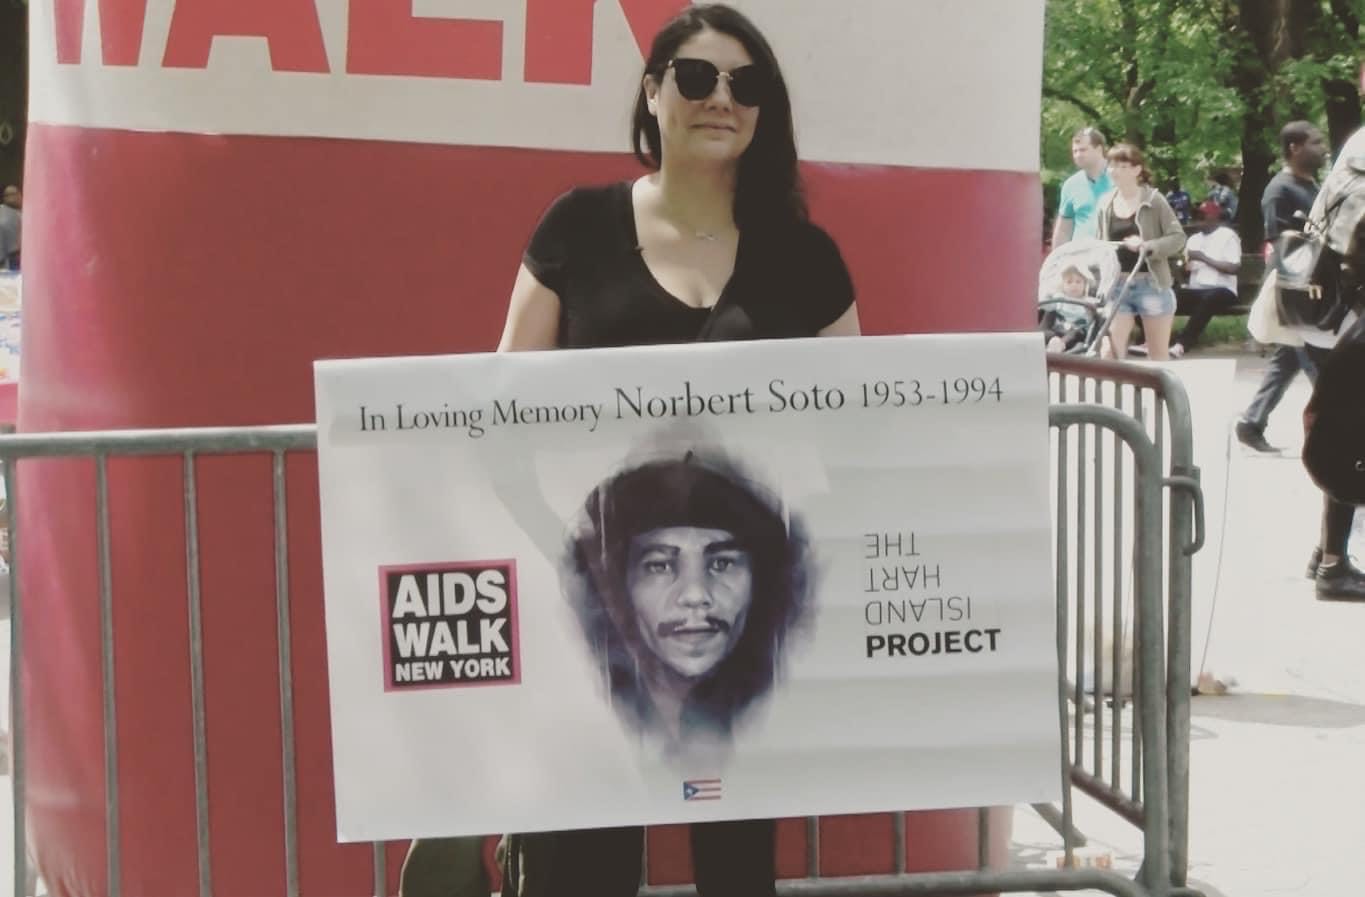 A photo of Elsie Soto holding a sign featuring a photo of her father, Norberto